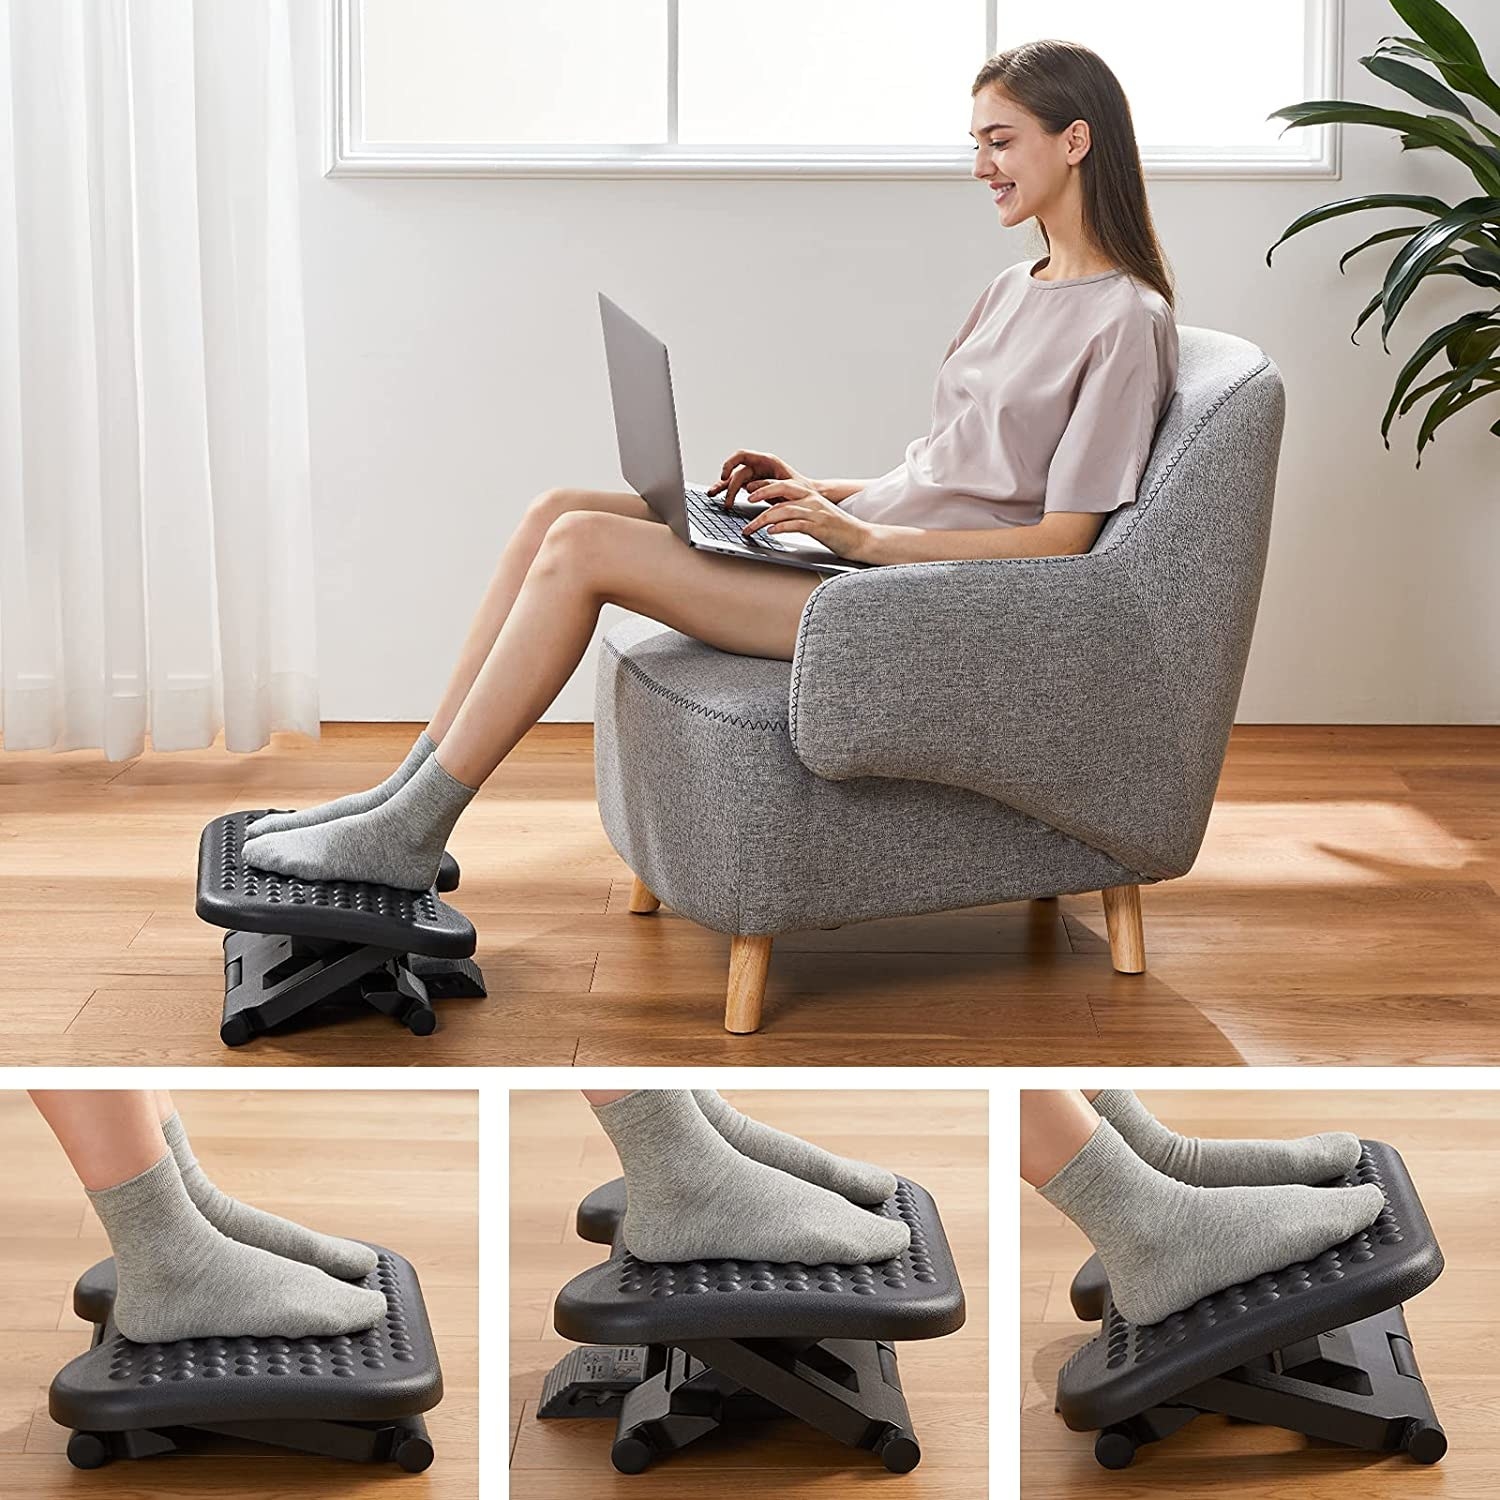 A photo grid of a person using the footrest in all its different positions